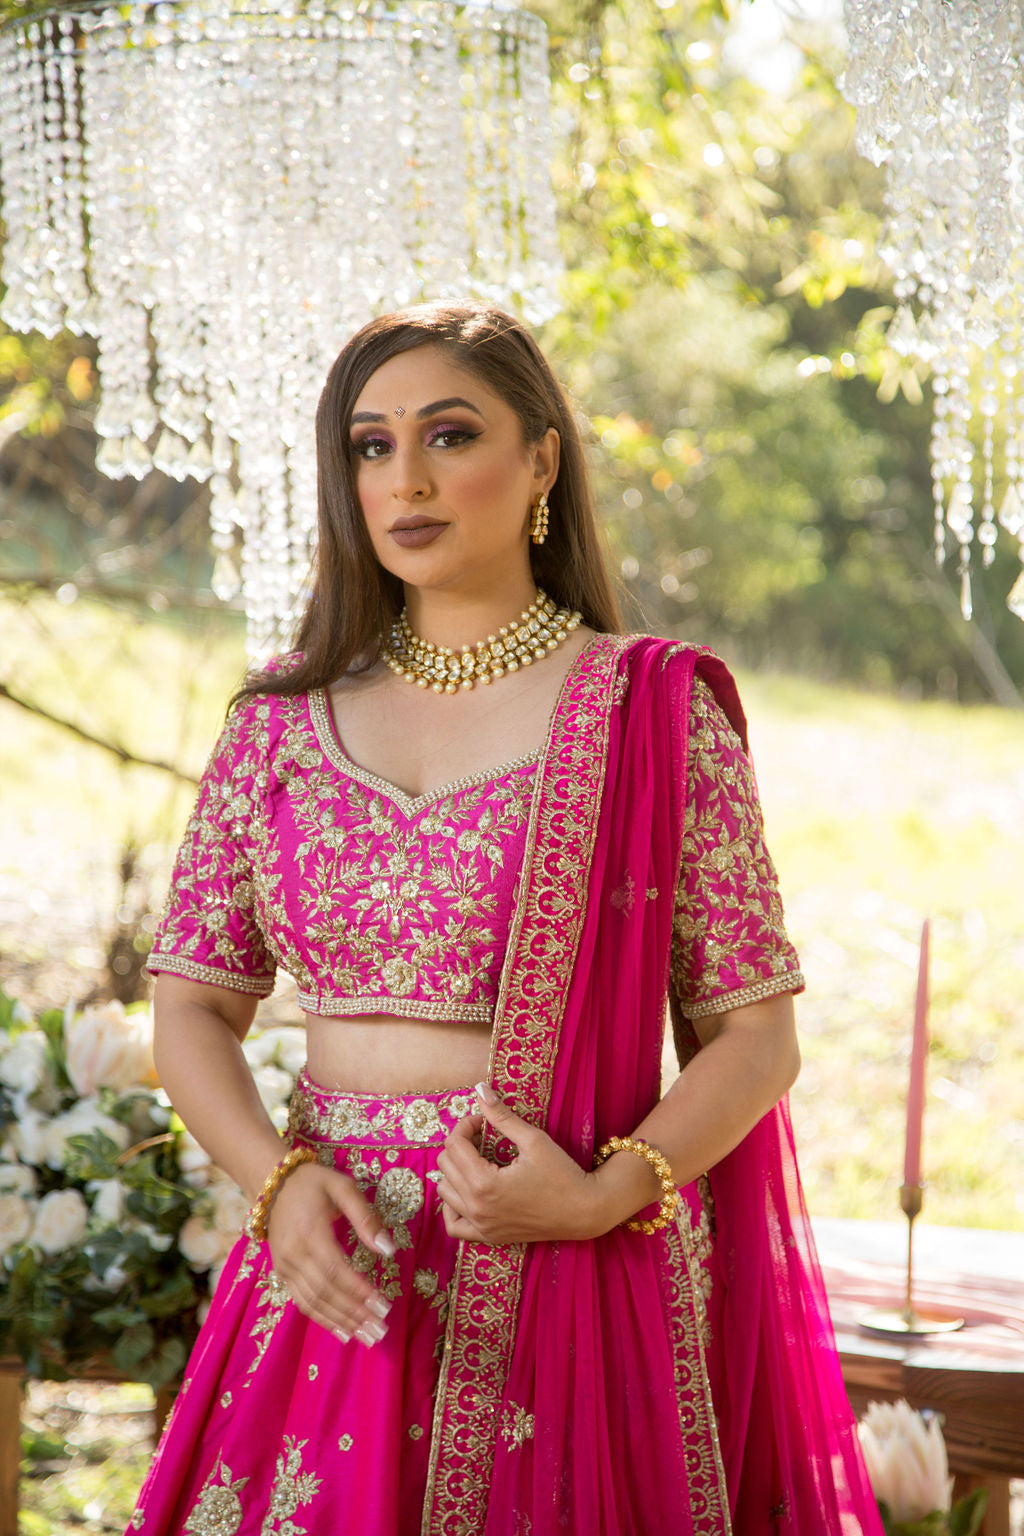 34 Impressive Jewellery Ideas to pair with your Pink Bridal Lehenga |  Indien, Kleidung